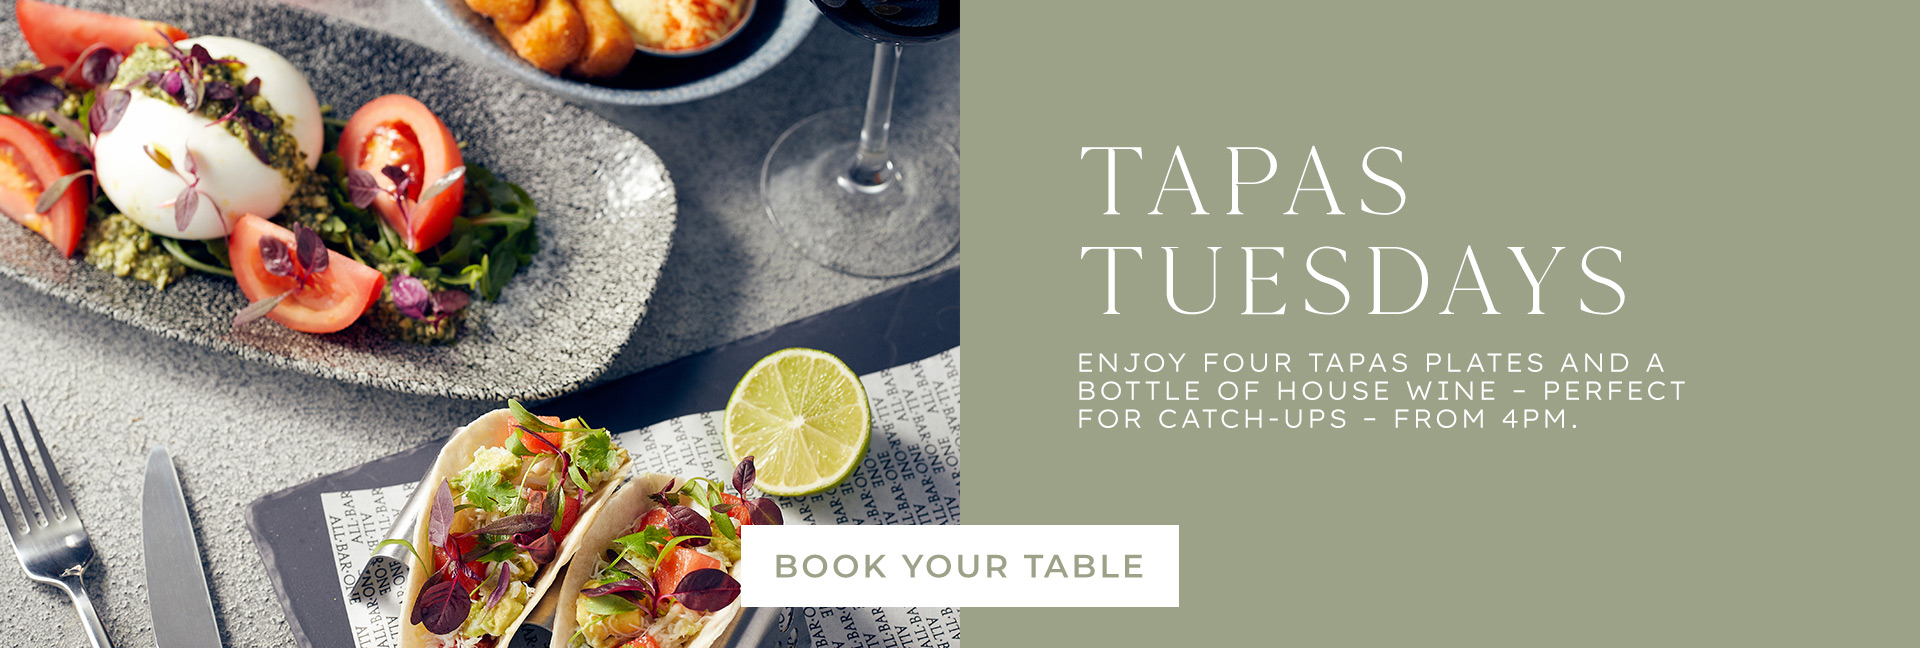 Tapas Tuesday at All Bar One Guildford - Book now